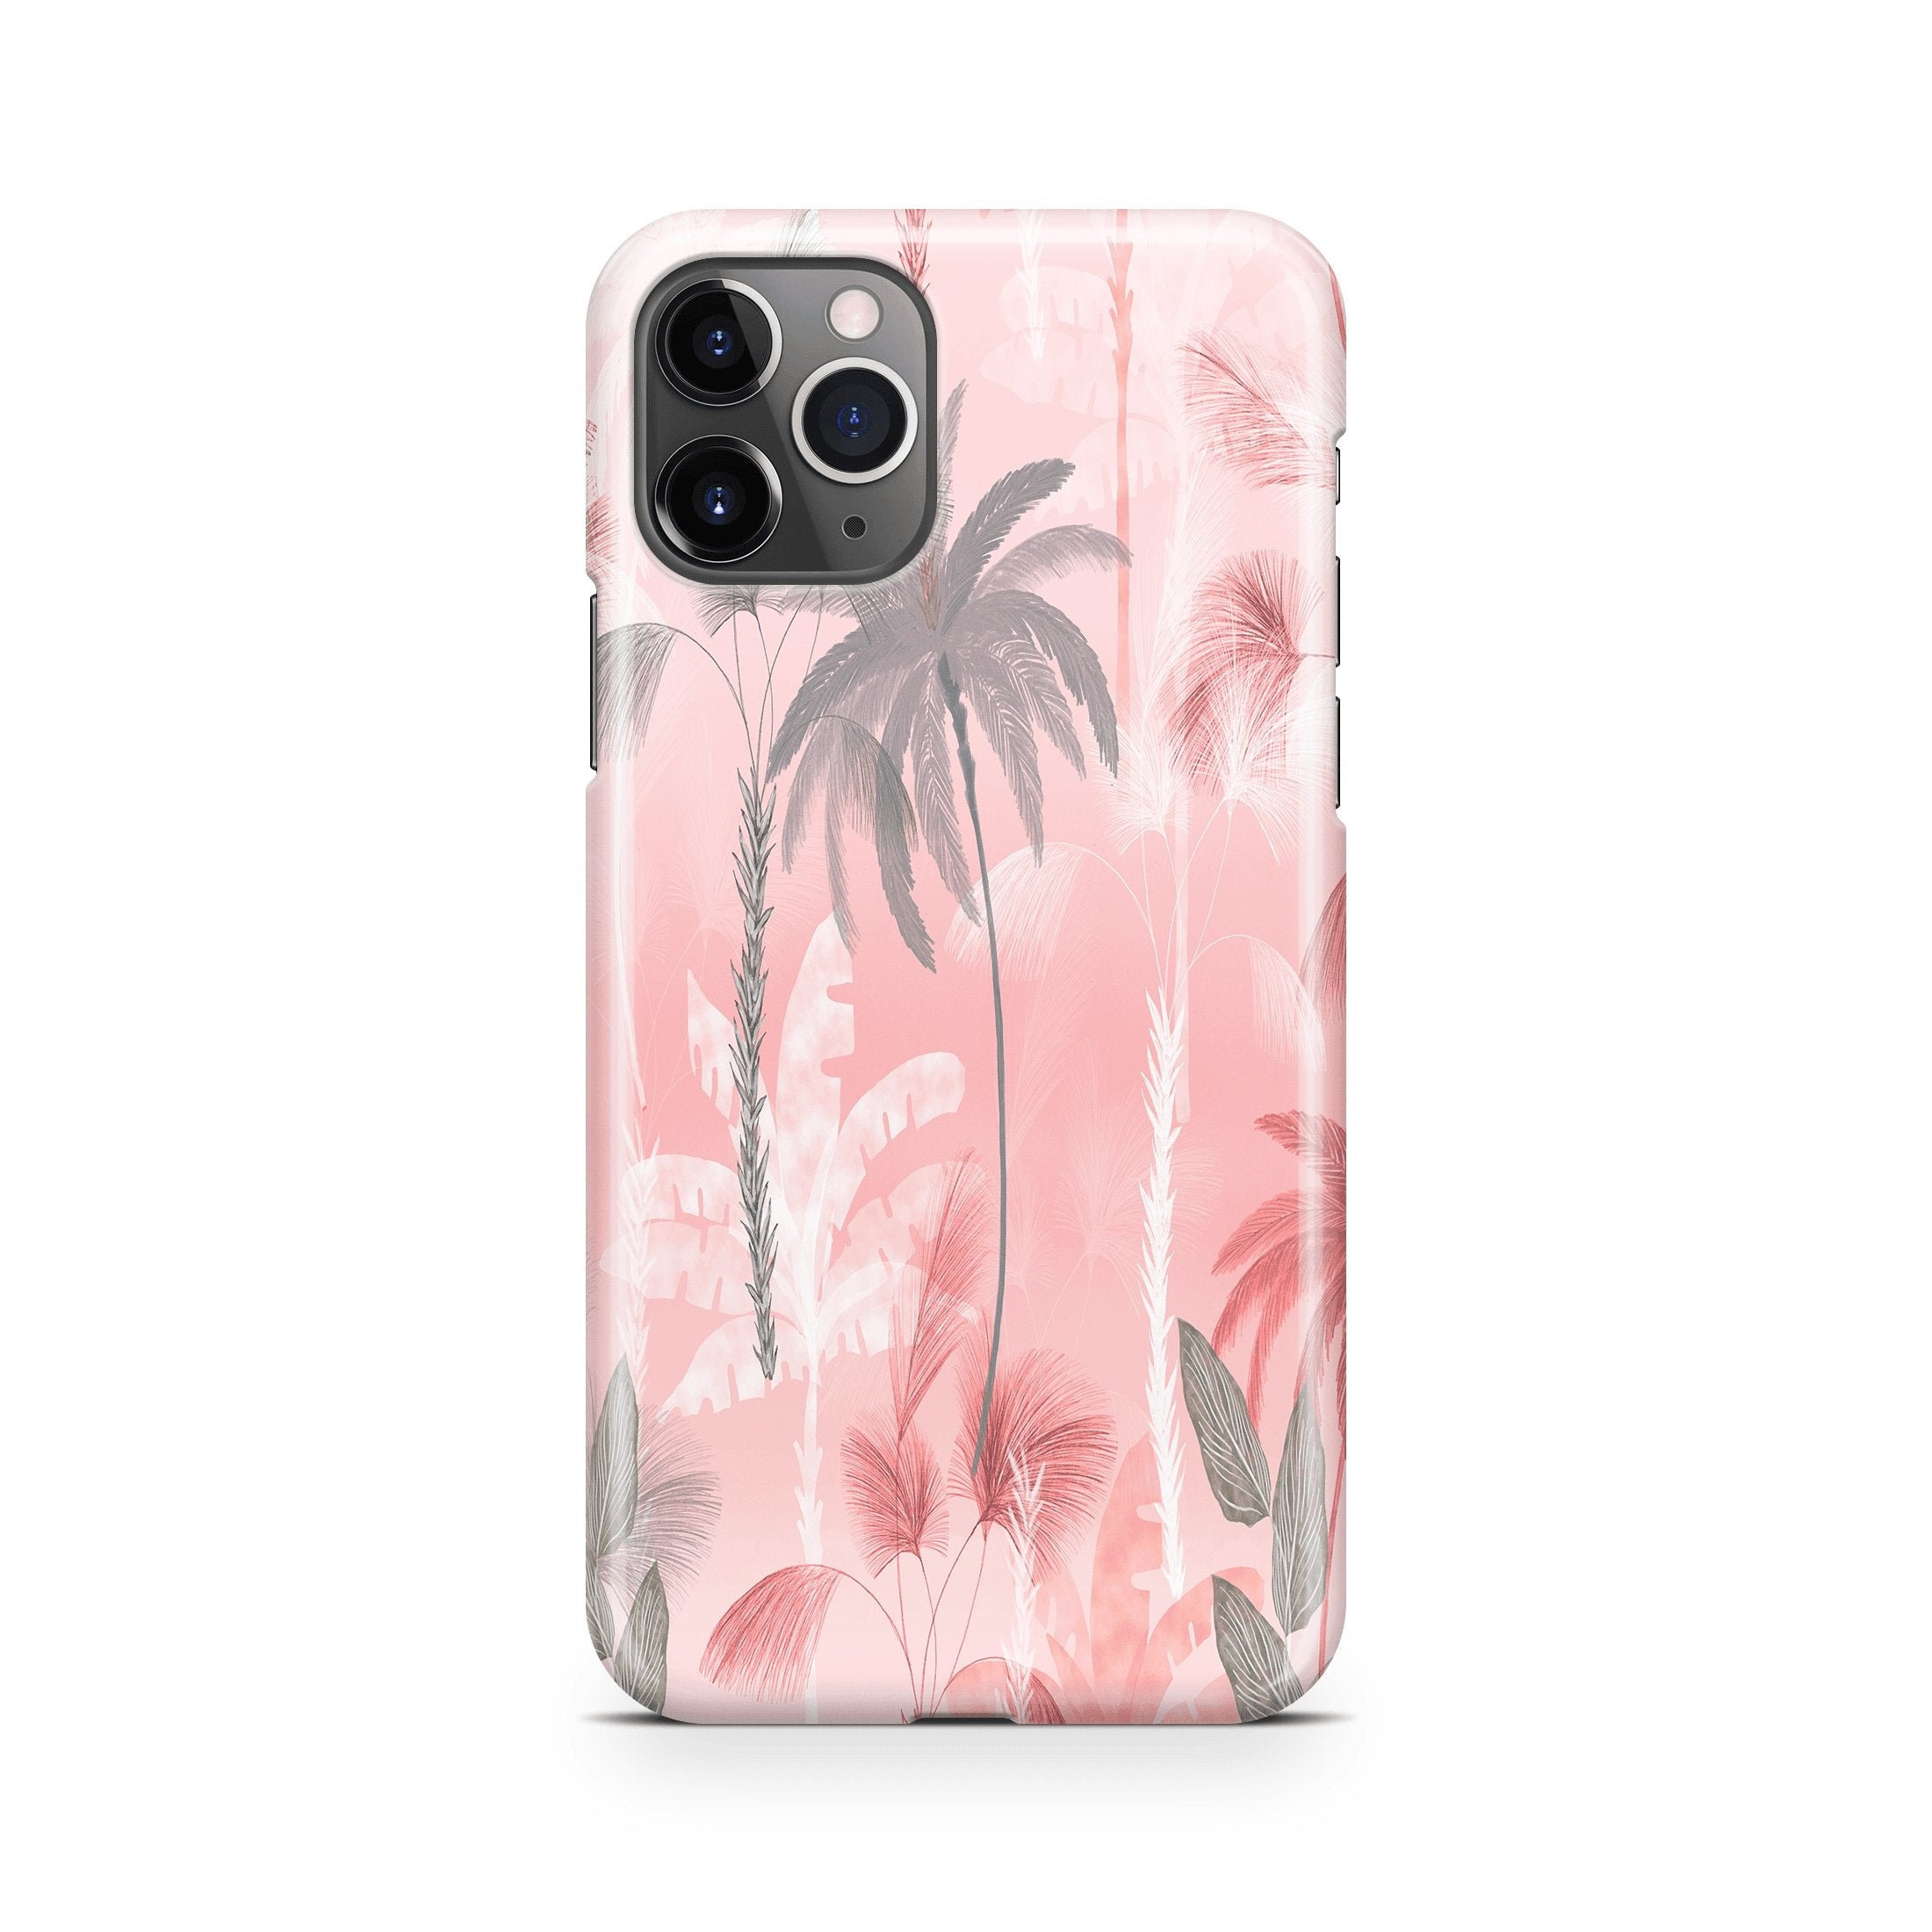 Smoothie Tropical - iPhone phone case designs by CaseSwagger